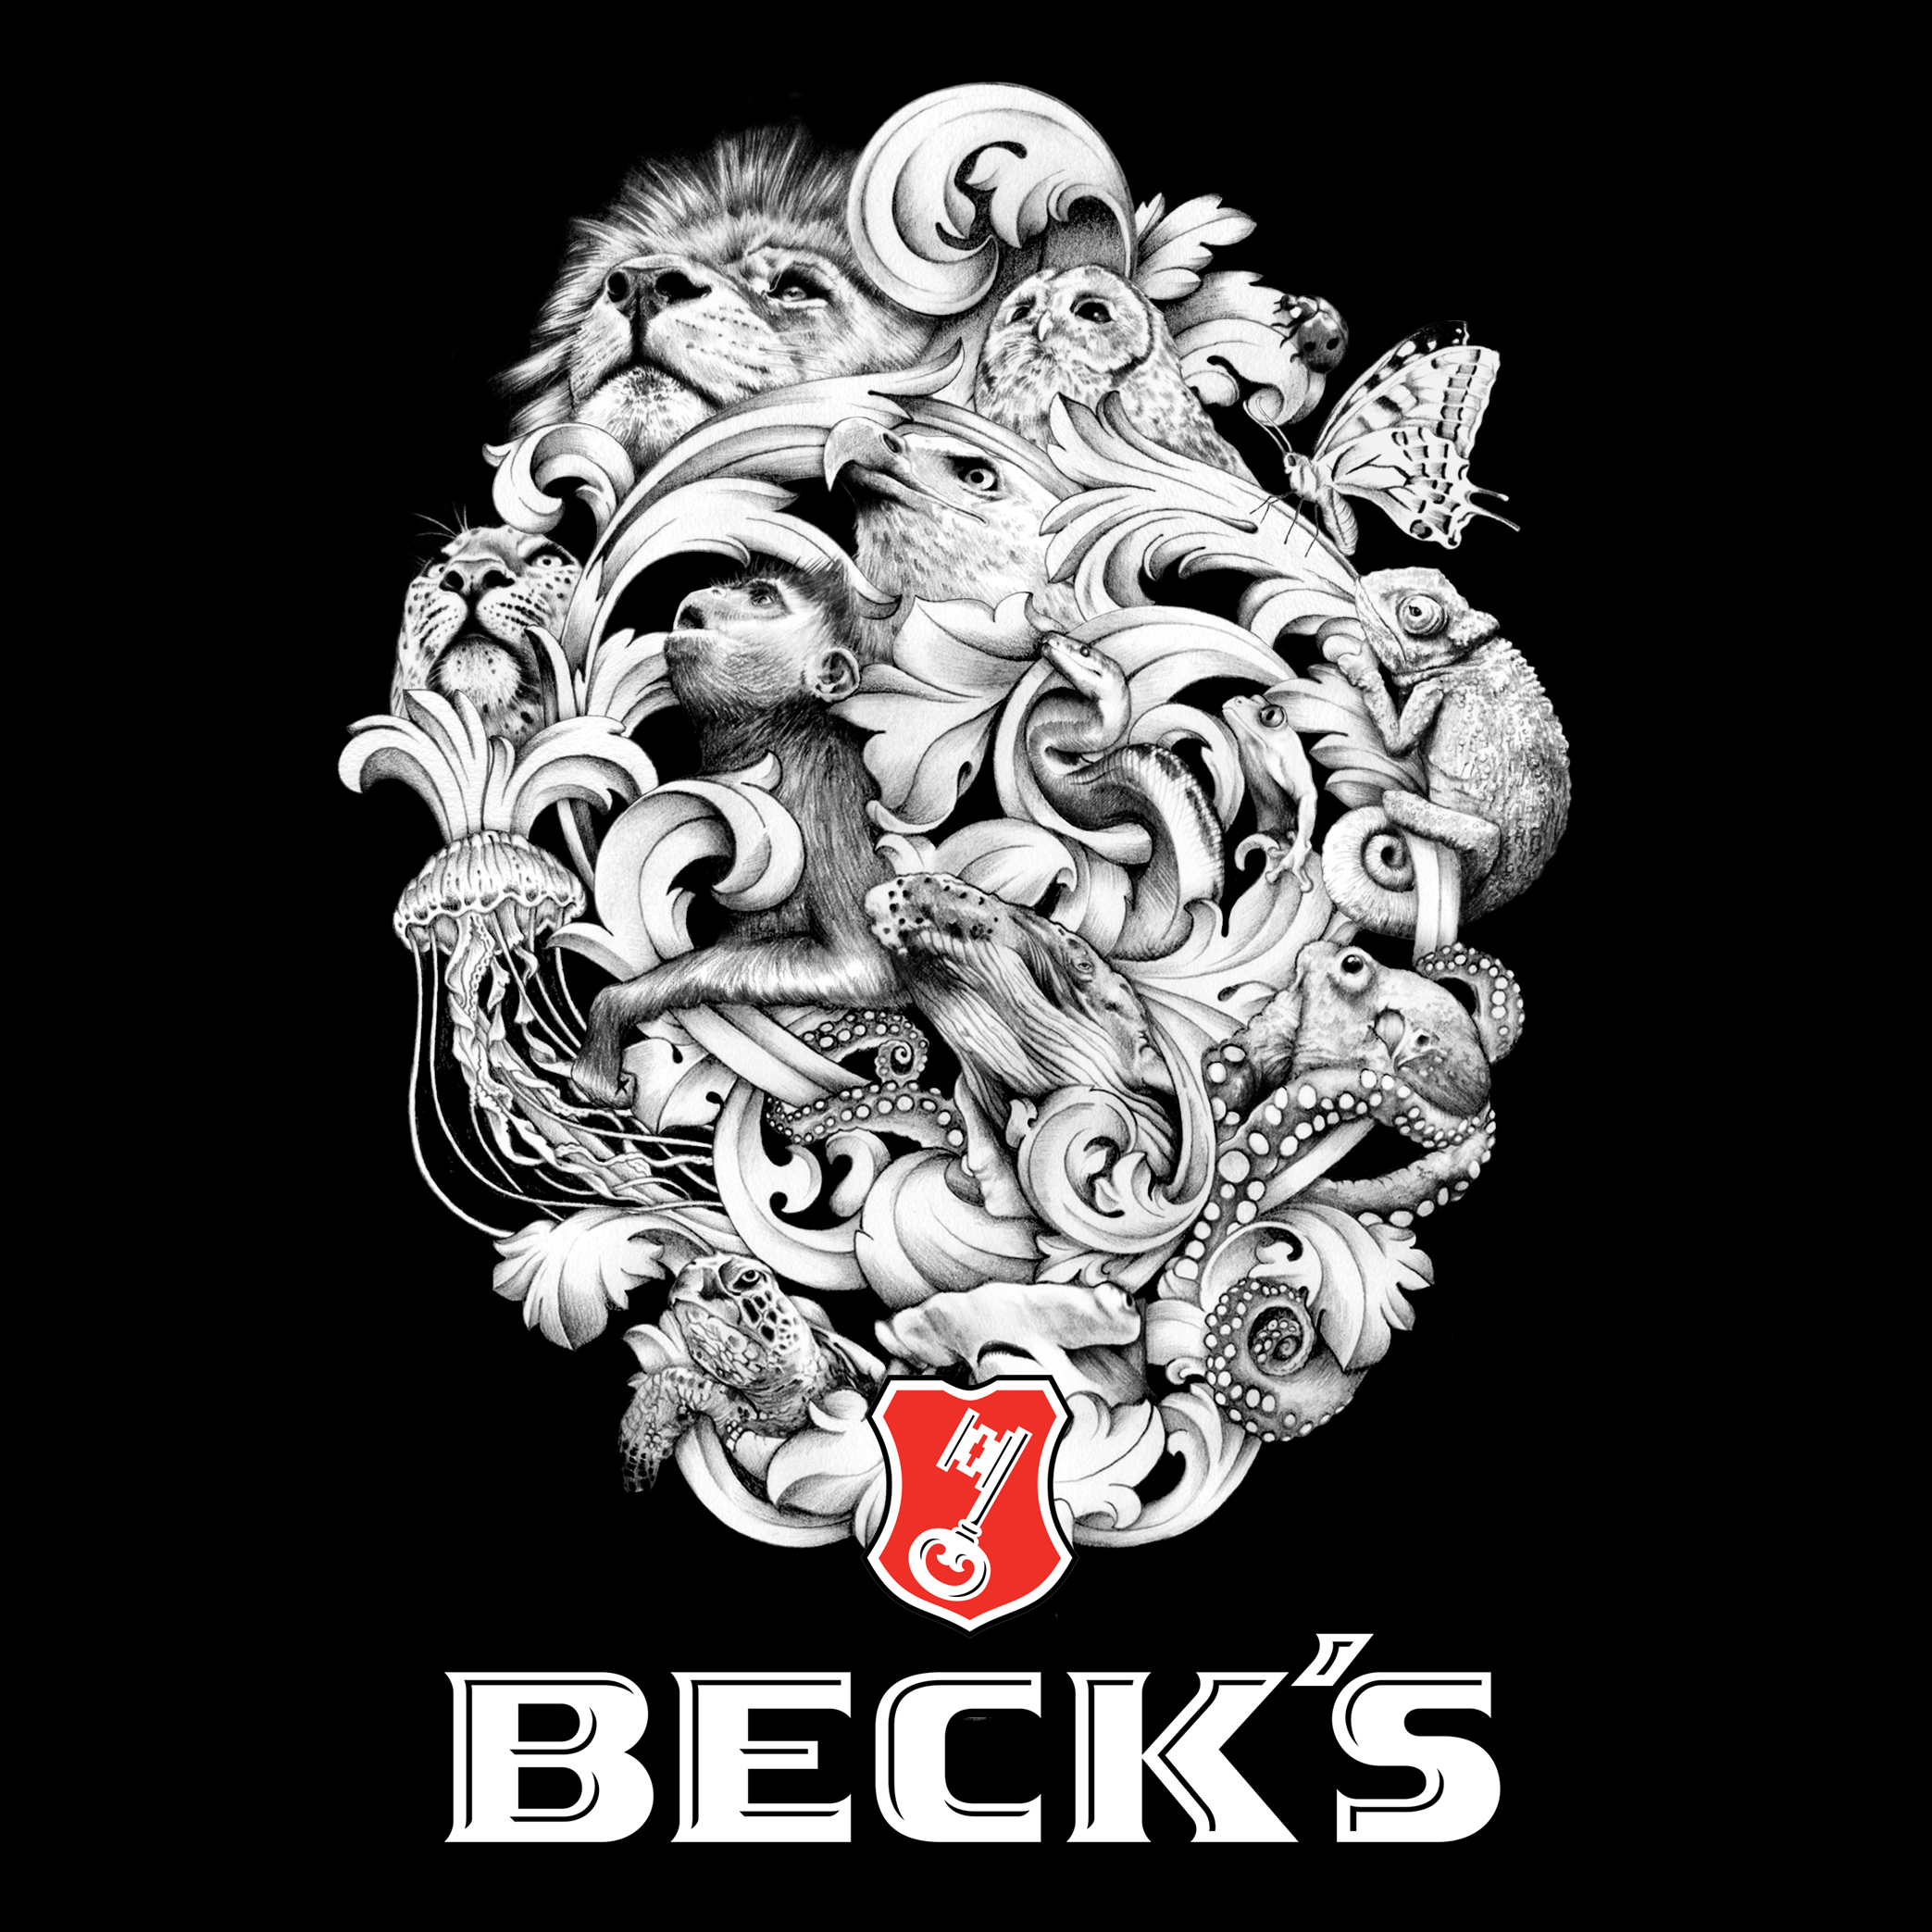 Beck's Cover_SQ.jpg